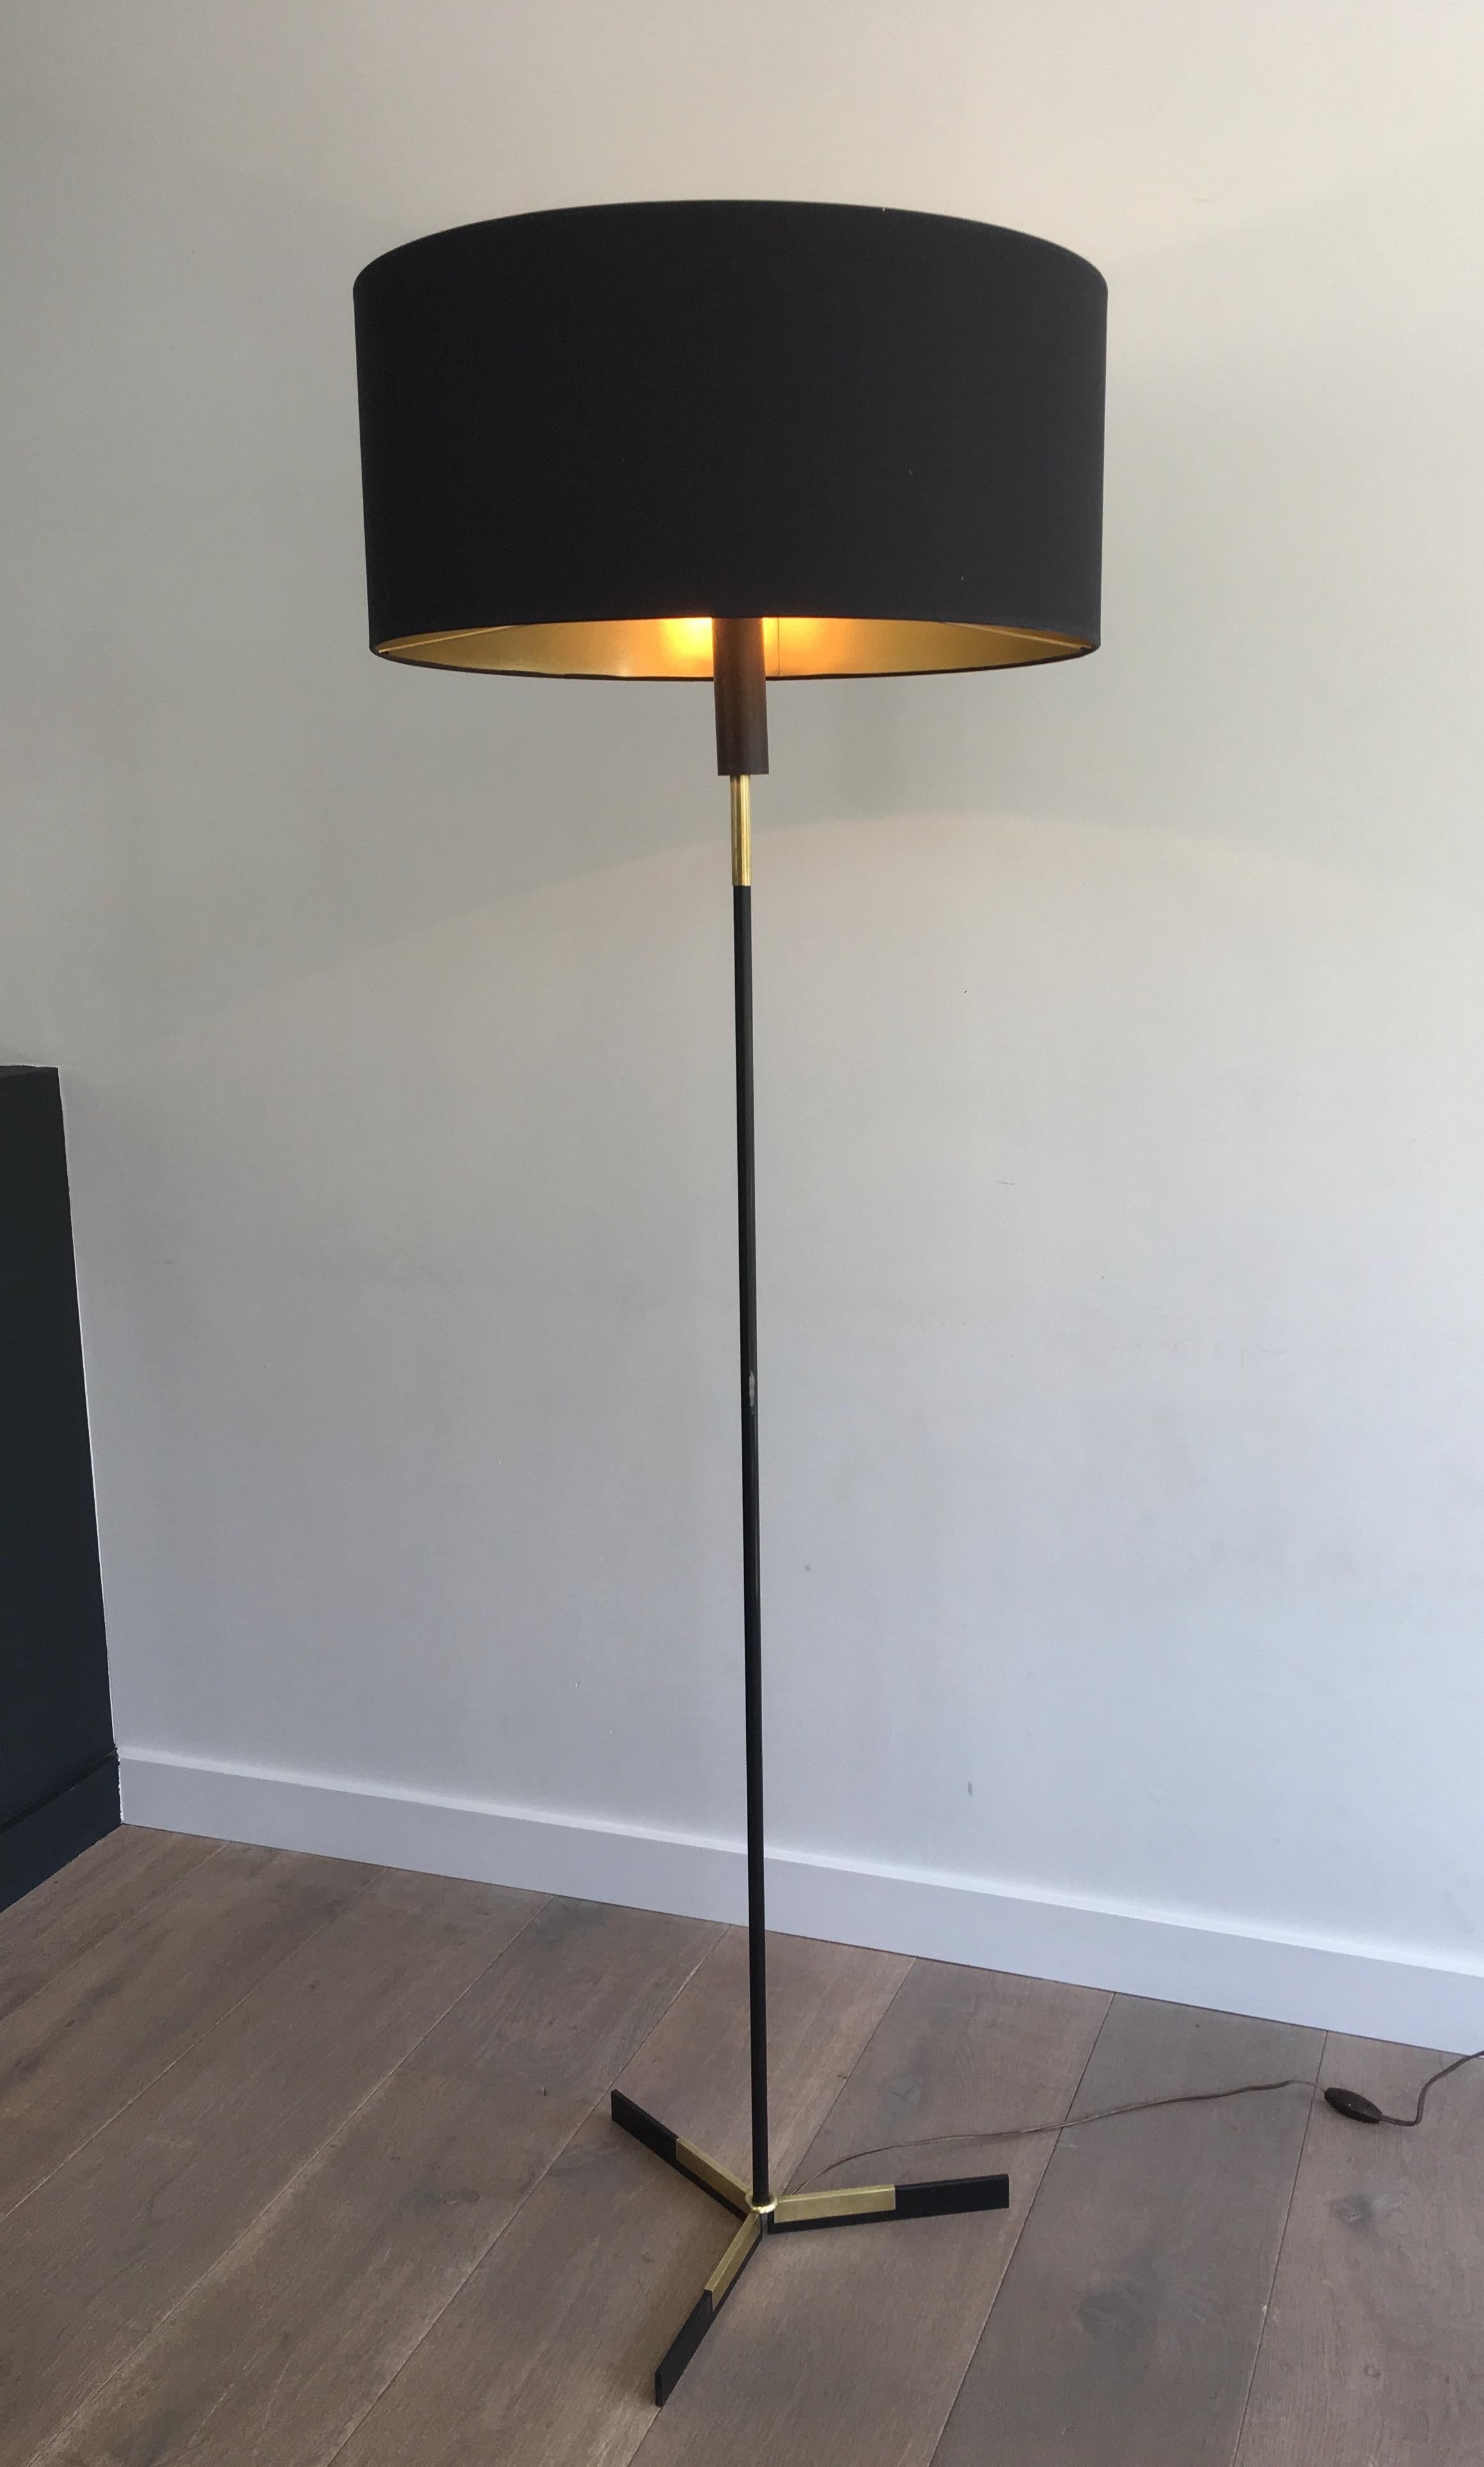 Black Lacquered and Brass Design Floor Lamp, French, circa 1950 For Sale 10